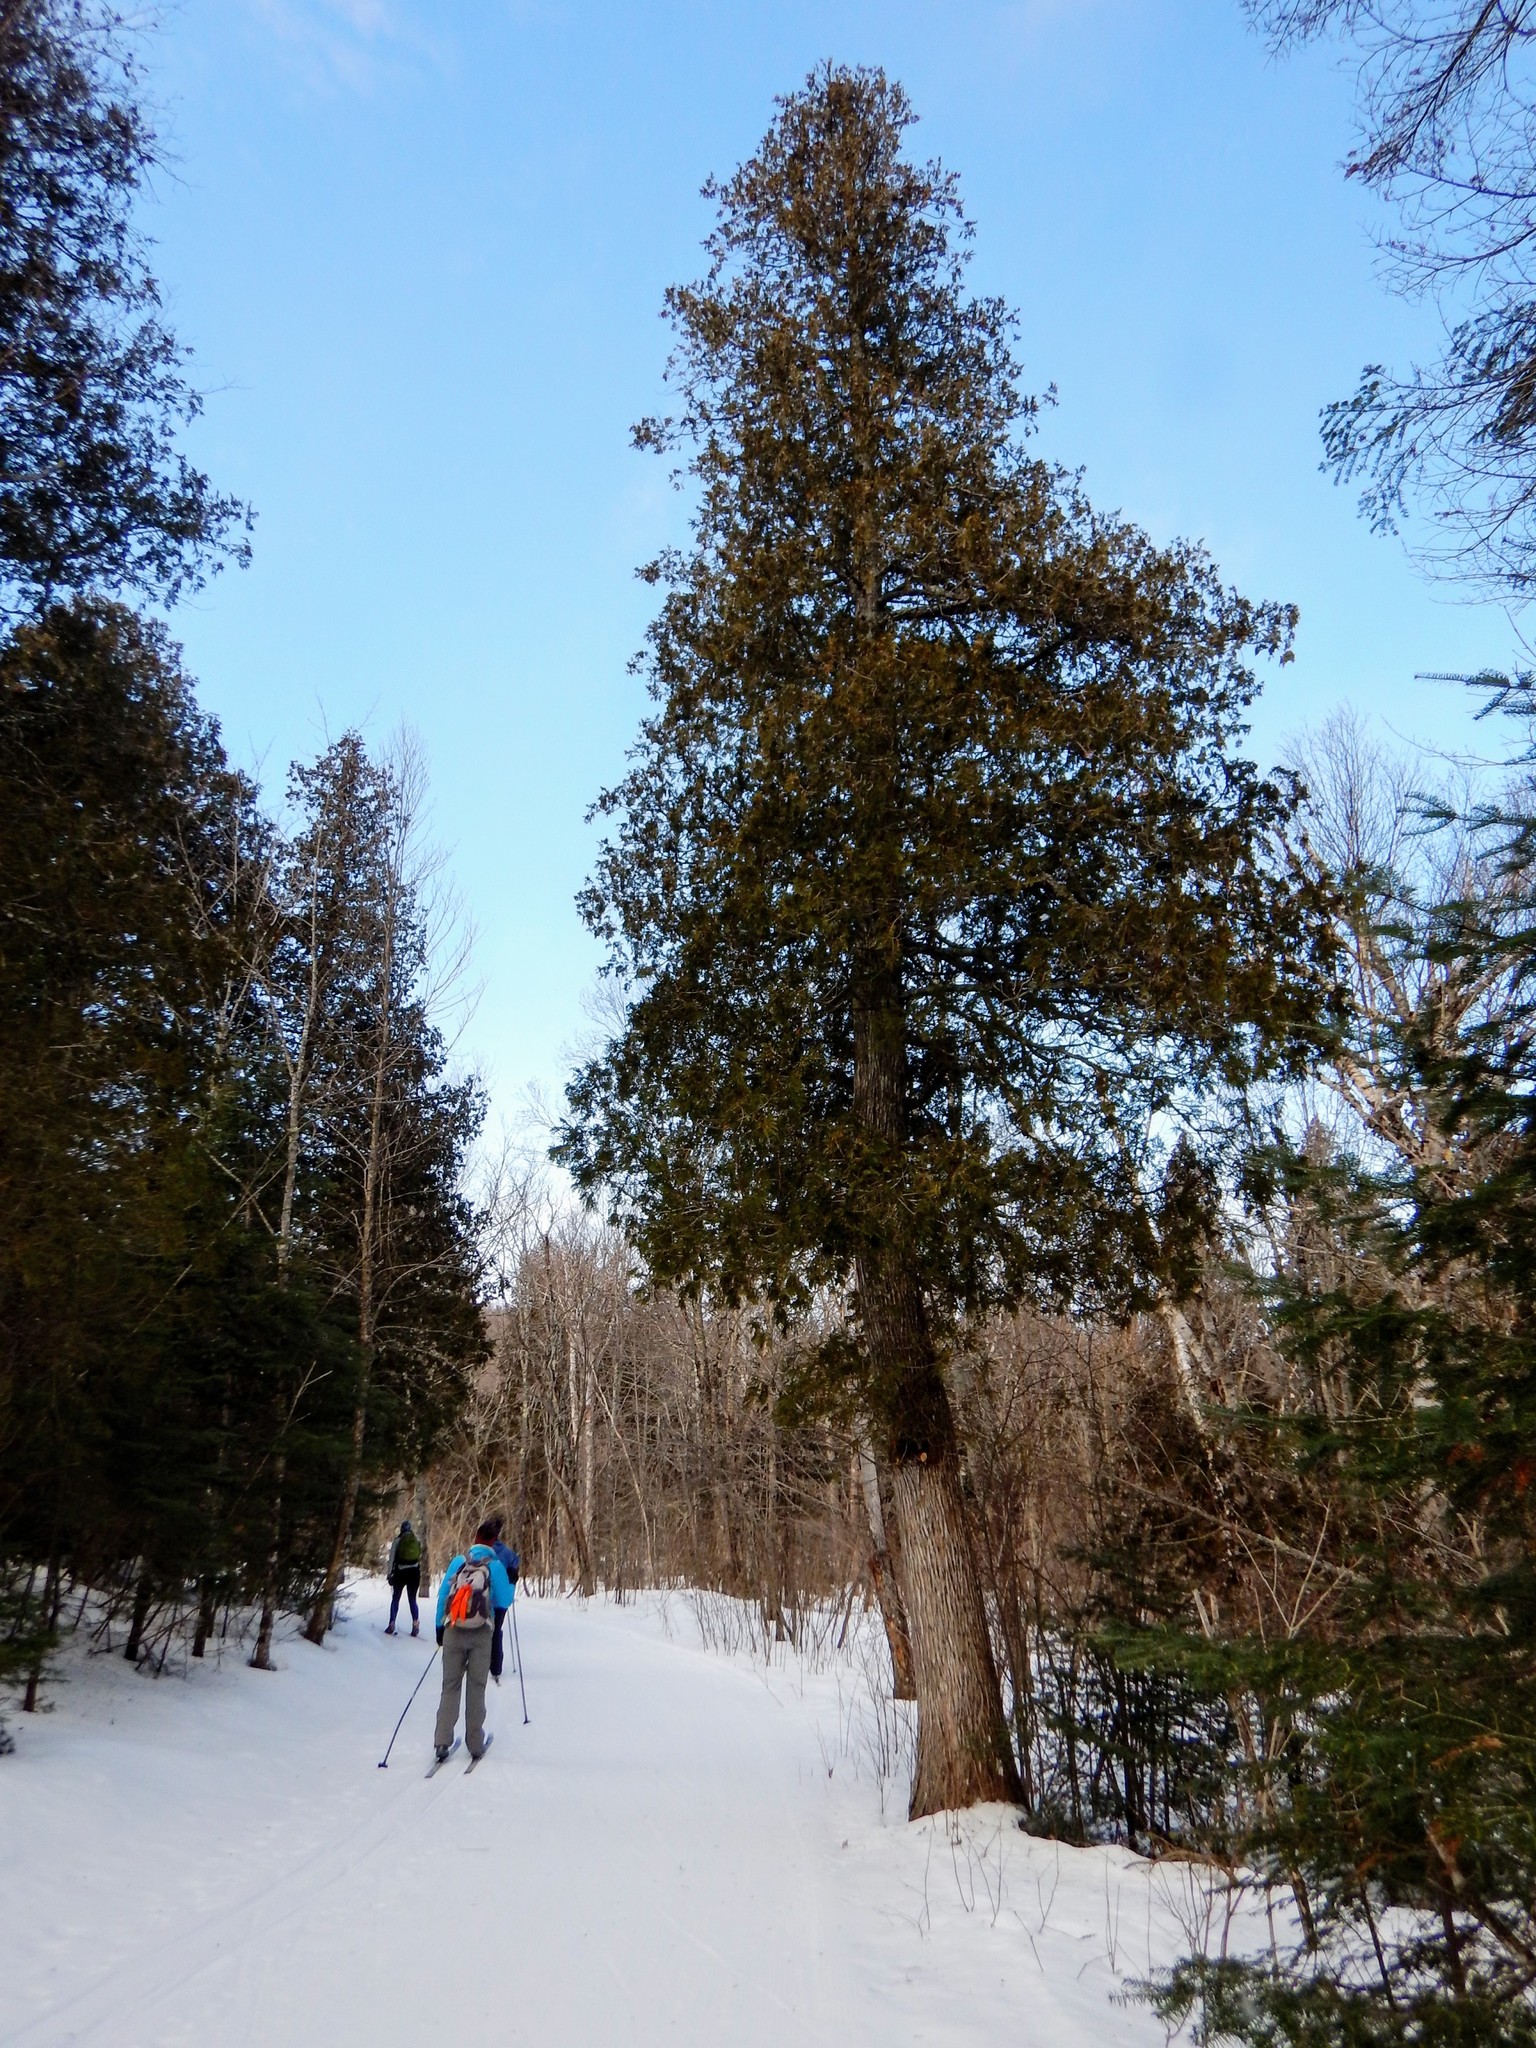 A white cedar tree in this image is over twenty feet tall, growing at the side of a skiiing trail.